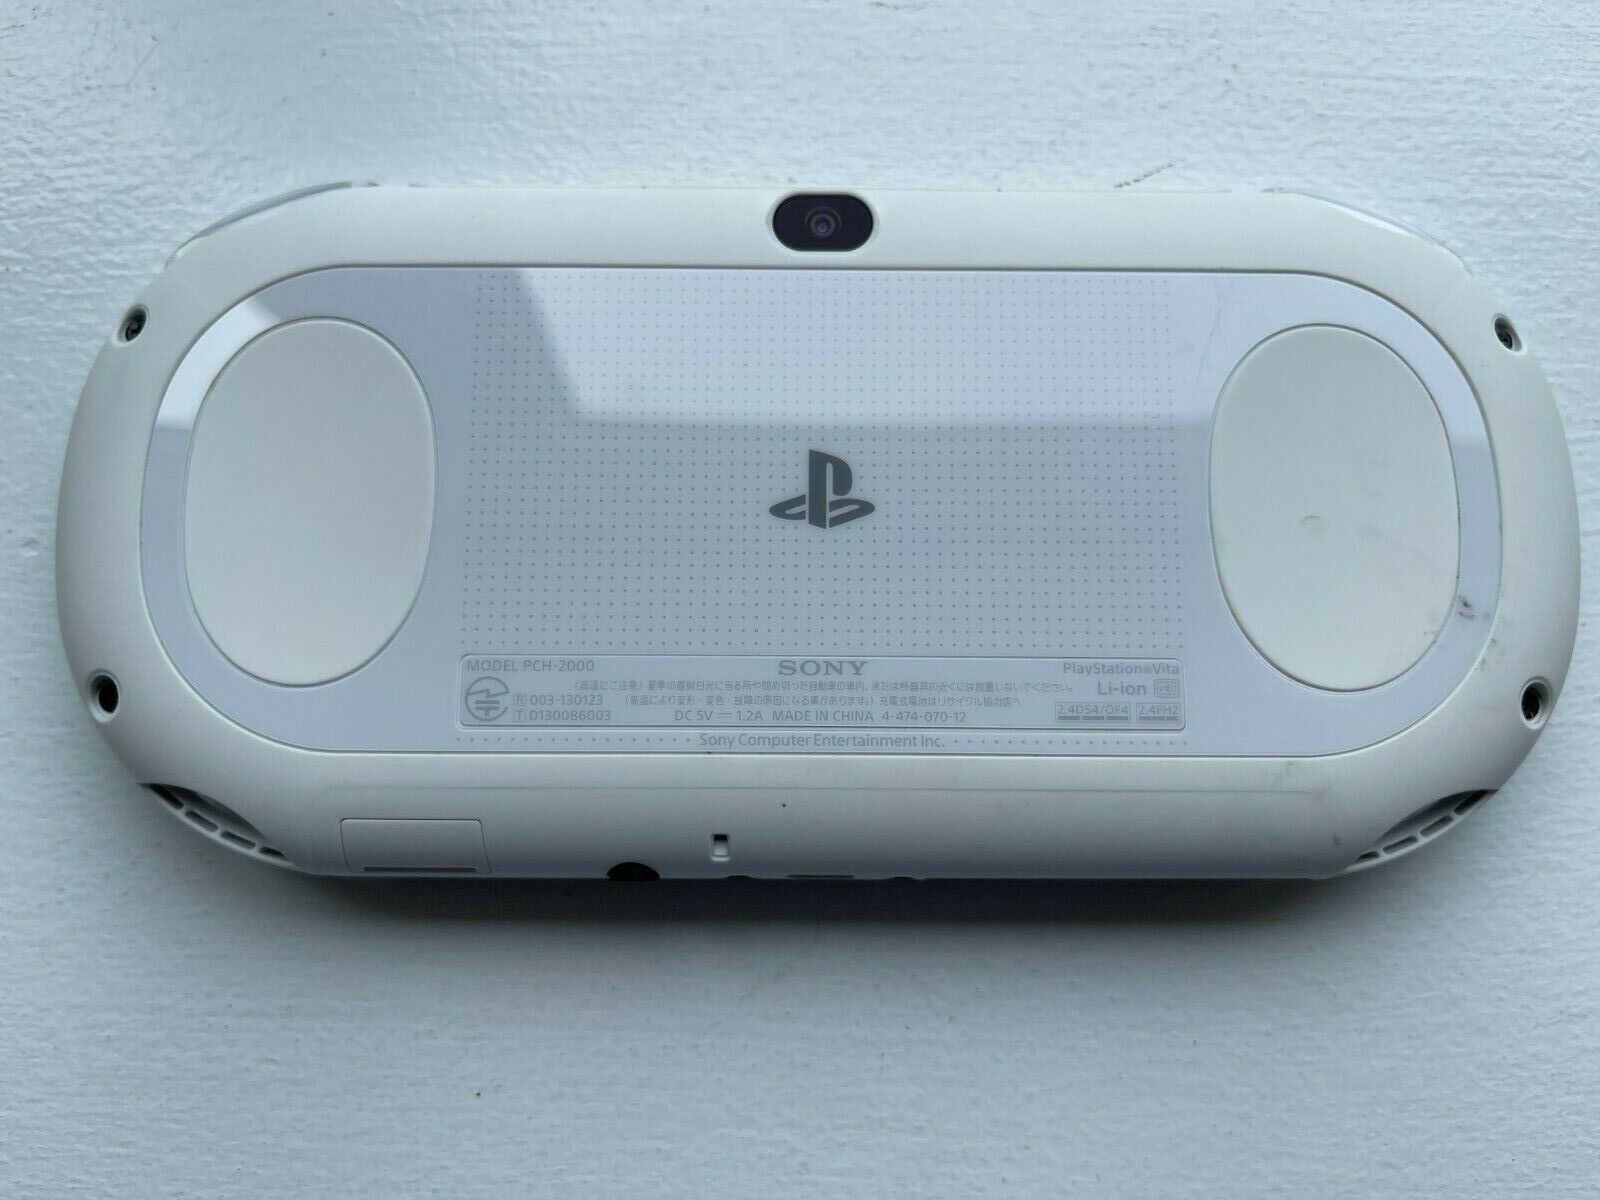 Sony Playstation PS Vita 2000 Slim PCH-2000 - White - *GREAT* + Charger